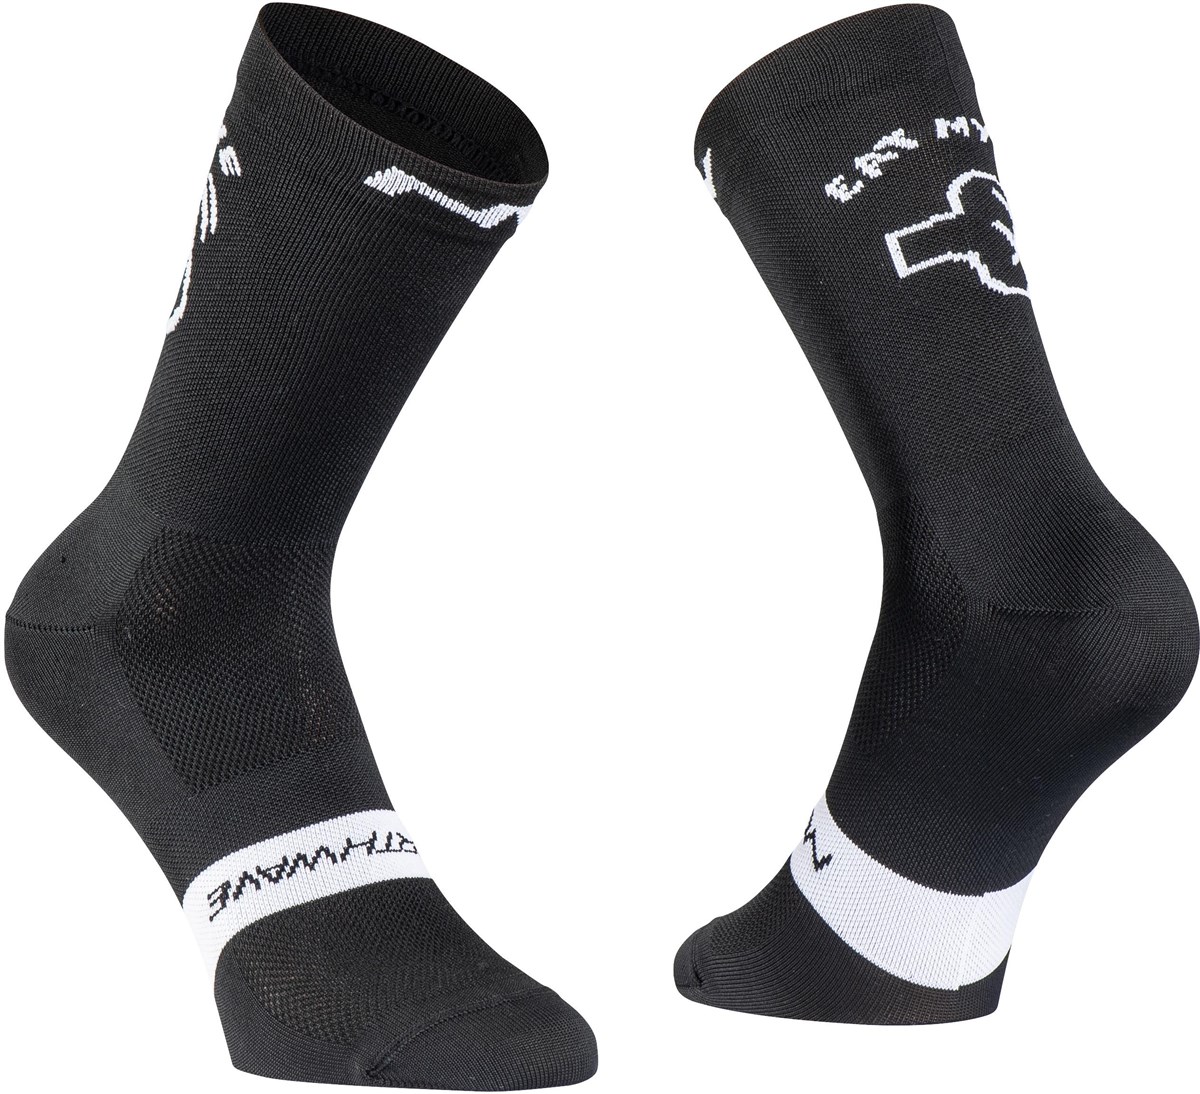 Northwave Eat My Dust Cycling Socks product image